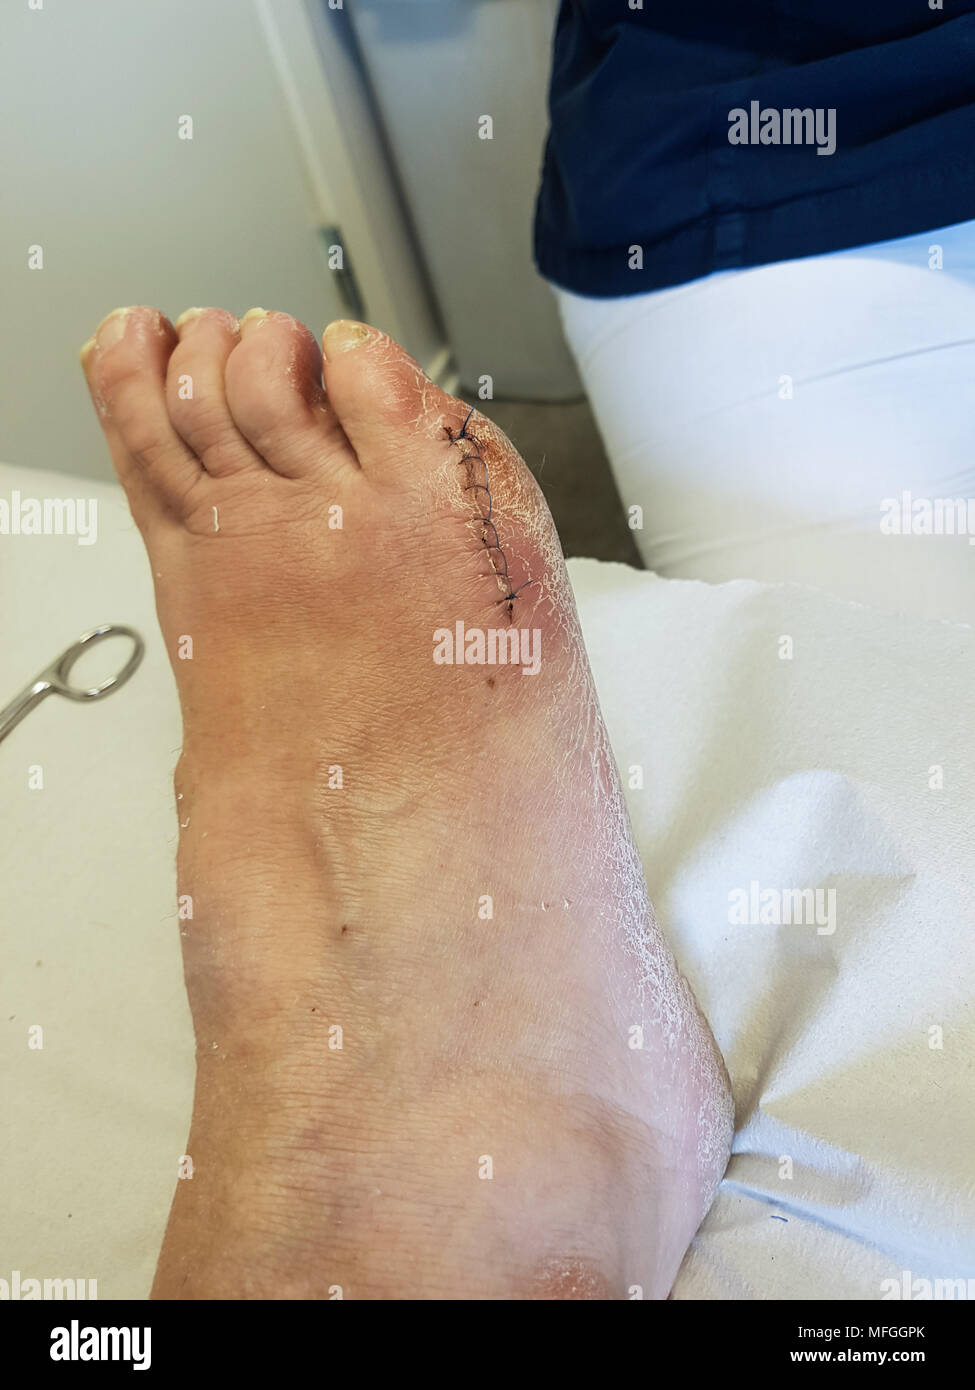 Stiches on the right foot three weeks after a bunion surgery. Stock Photo